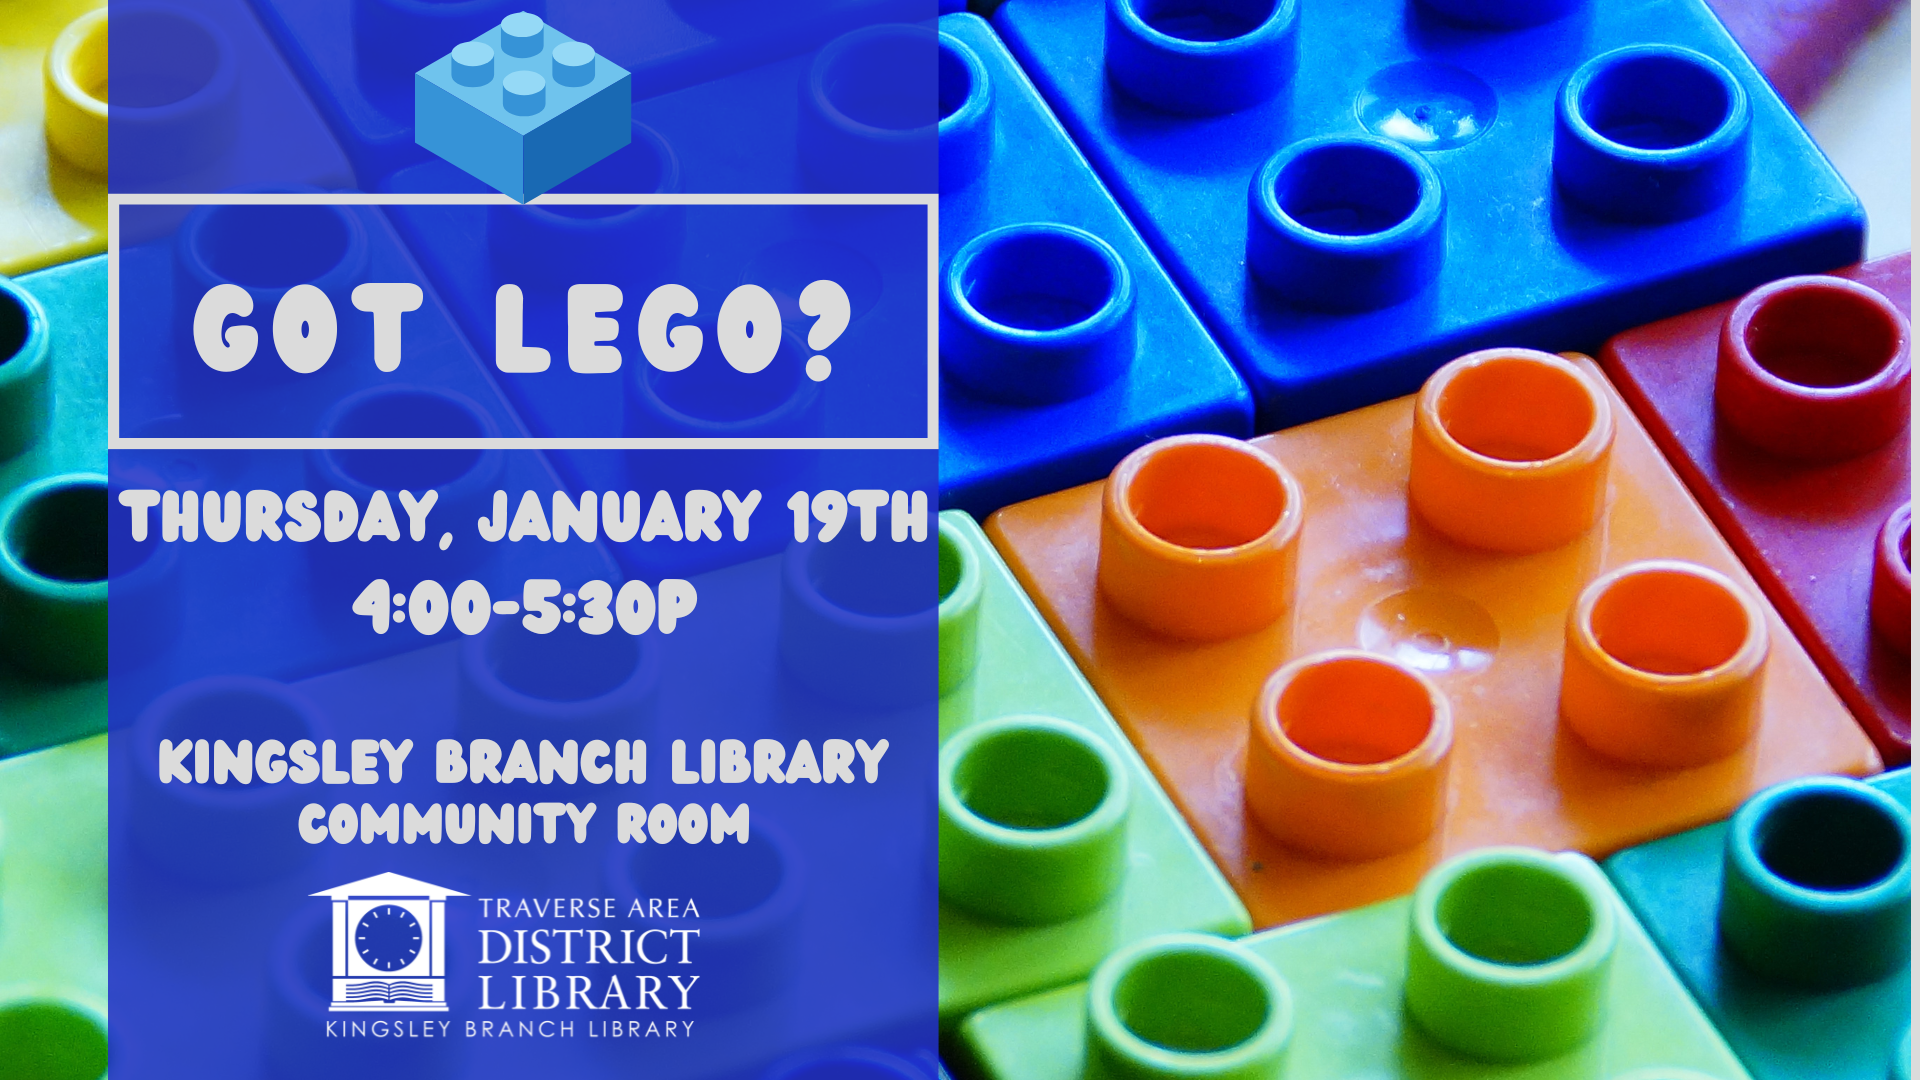 Image of colorful lego bricks, with the text Got Lego?, thursday january 19th, 2023 at Kingsley Branch Library imposed on top of them.